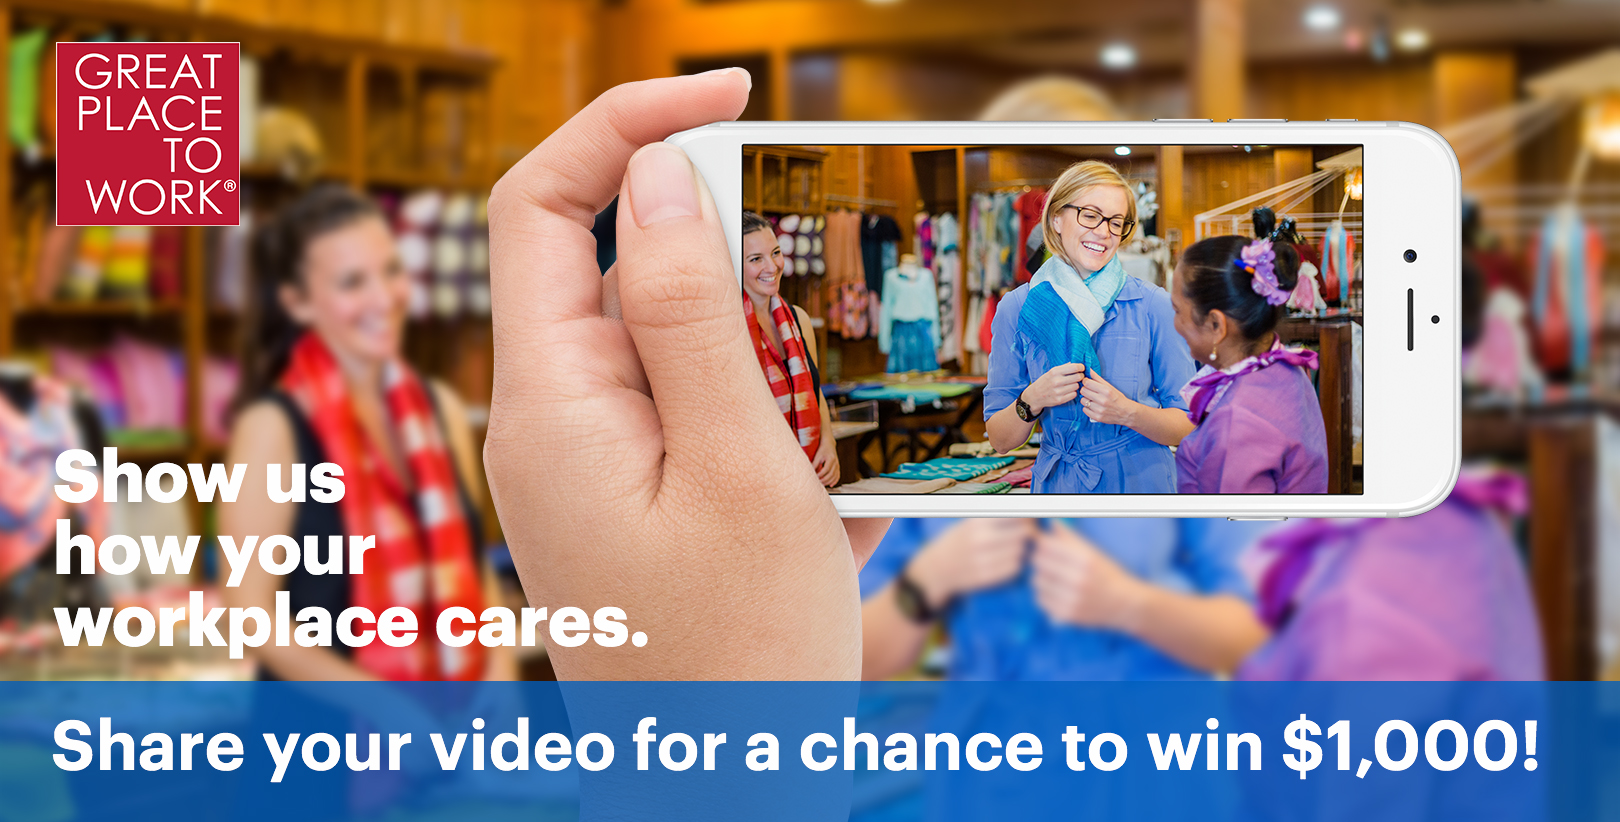 Announcing the 2017 Workplaces that Care Video Contest!